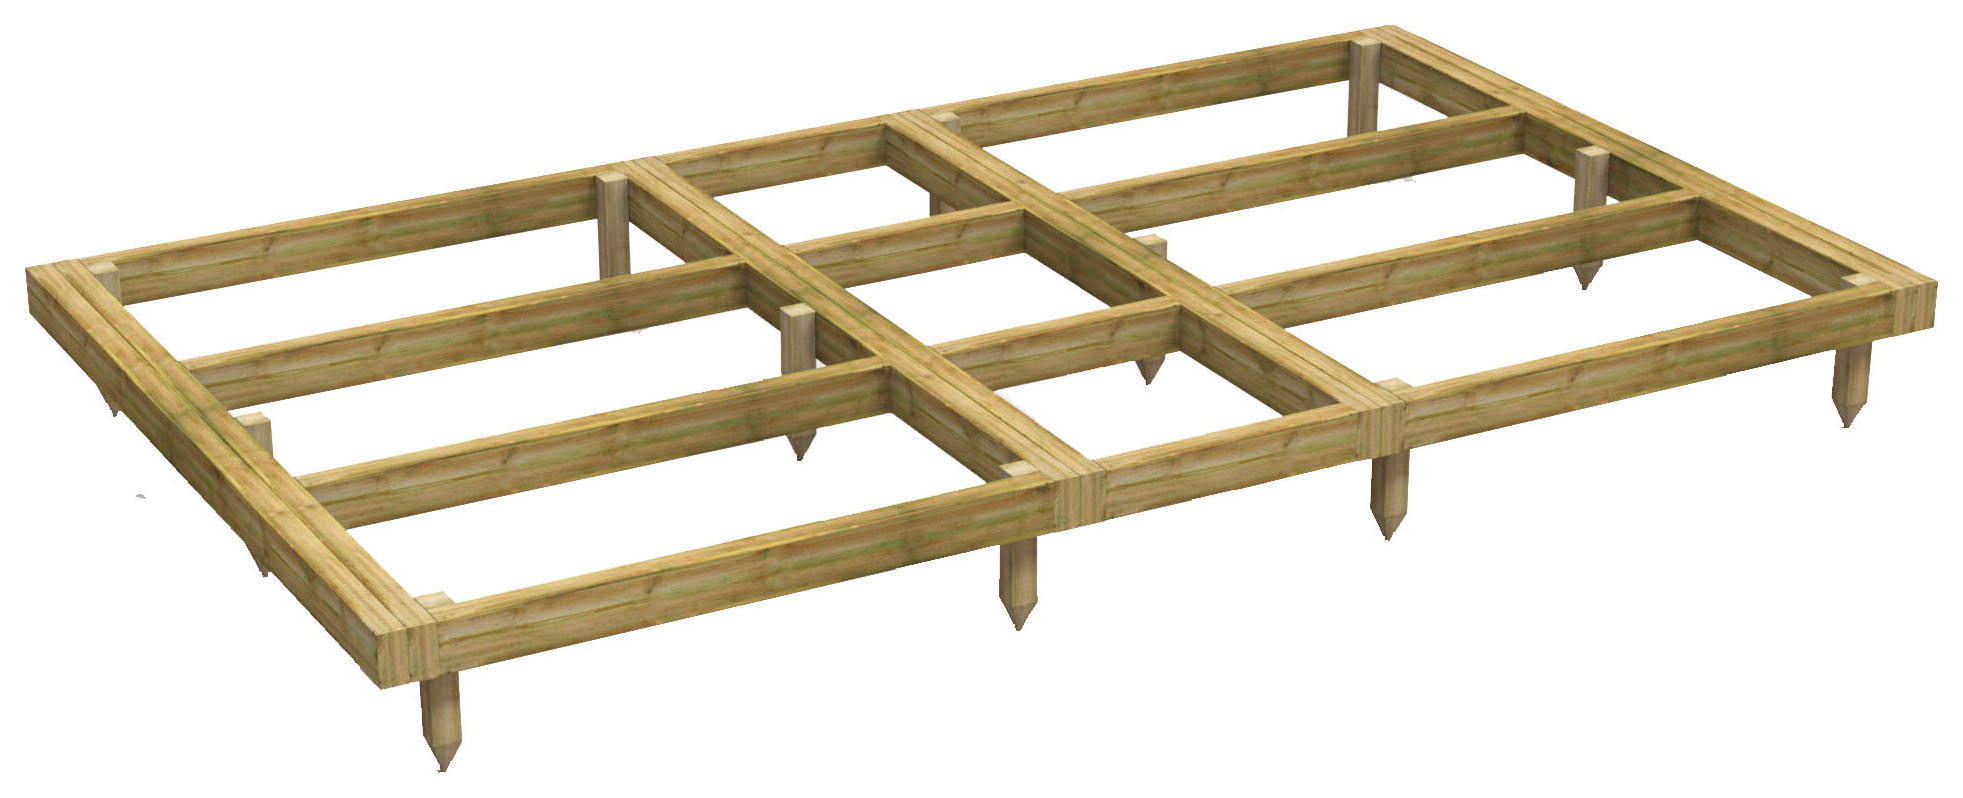 Image of Power Sheds 10 x 6ft Pressure Treated Garden Building Base Kit